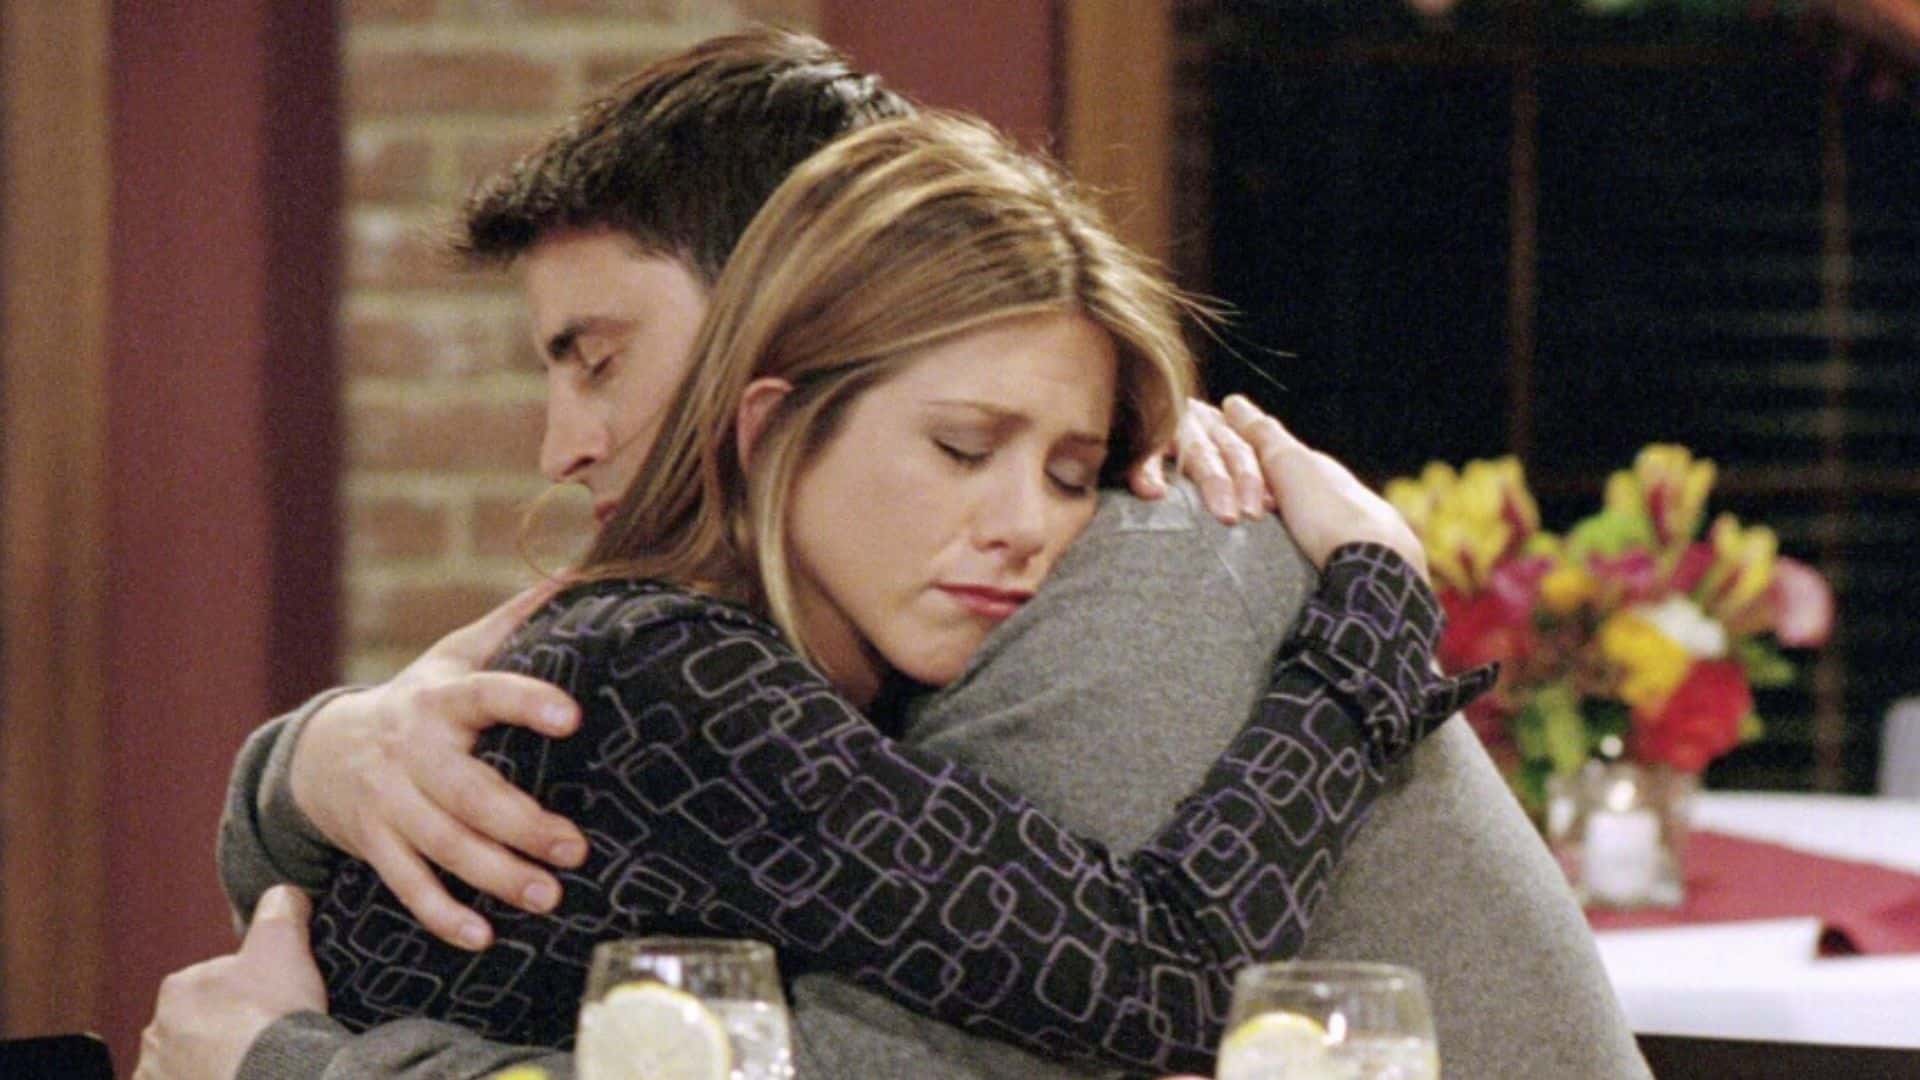 A man and a woman hug in a restaurant in this image from Warner Bros. Television.